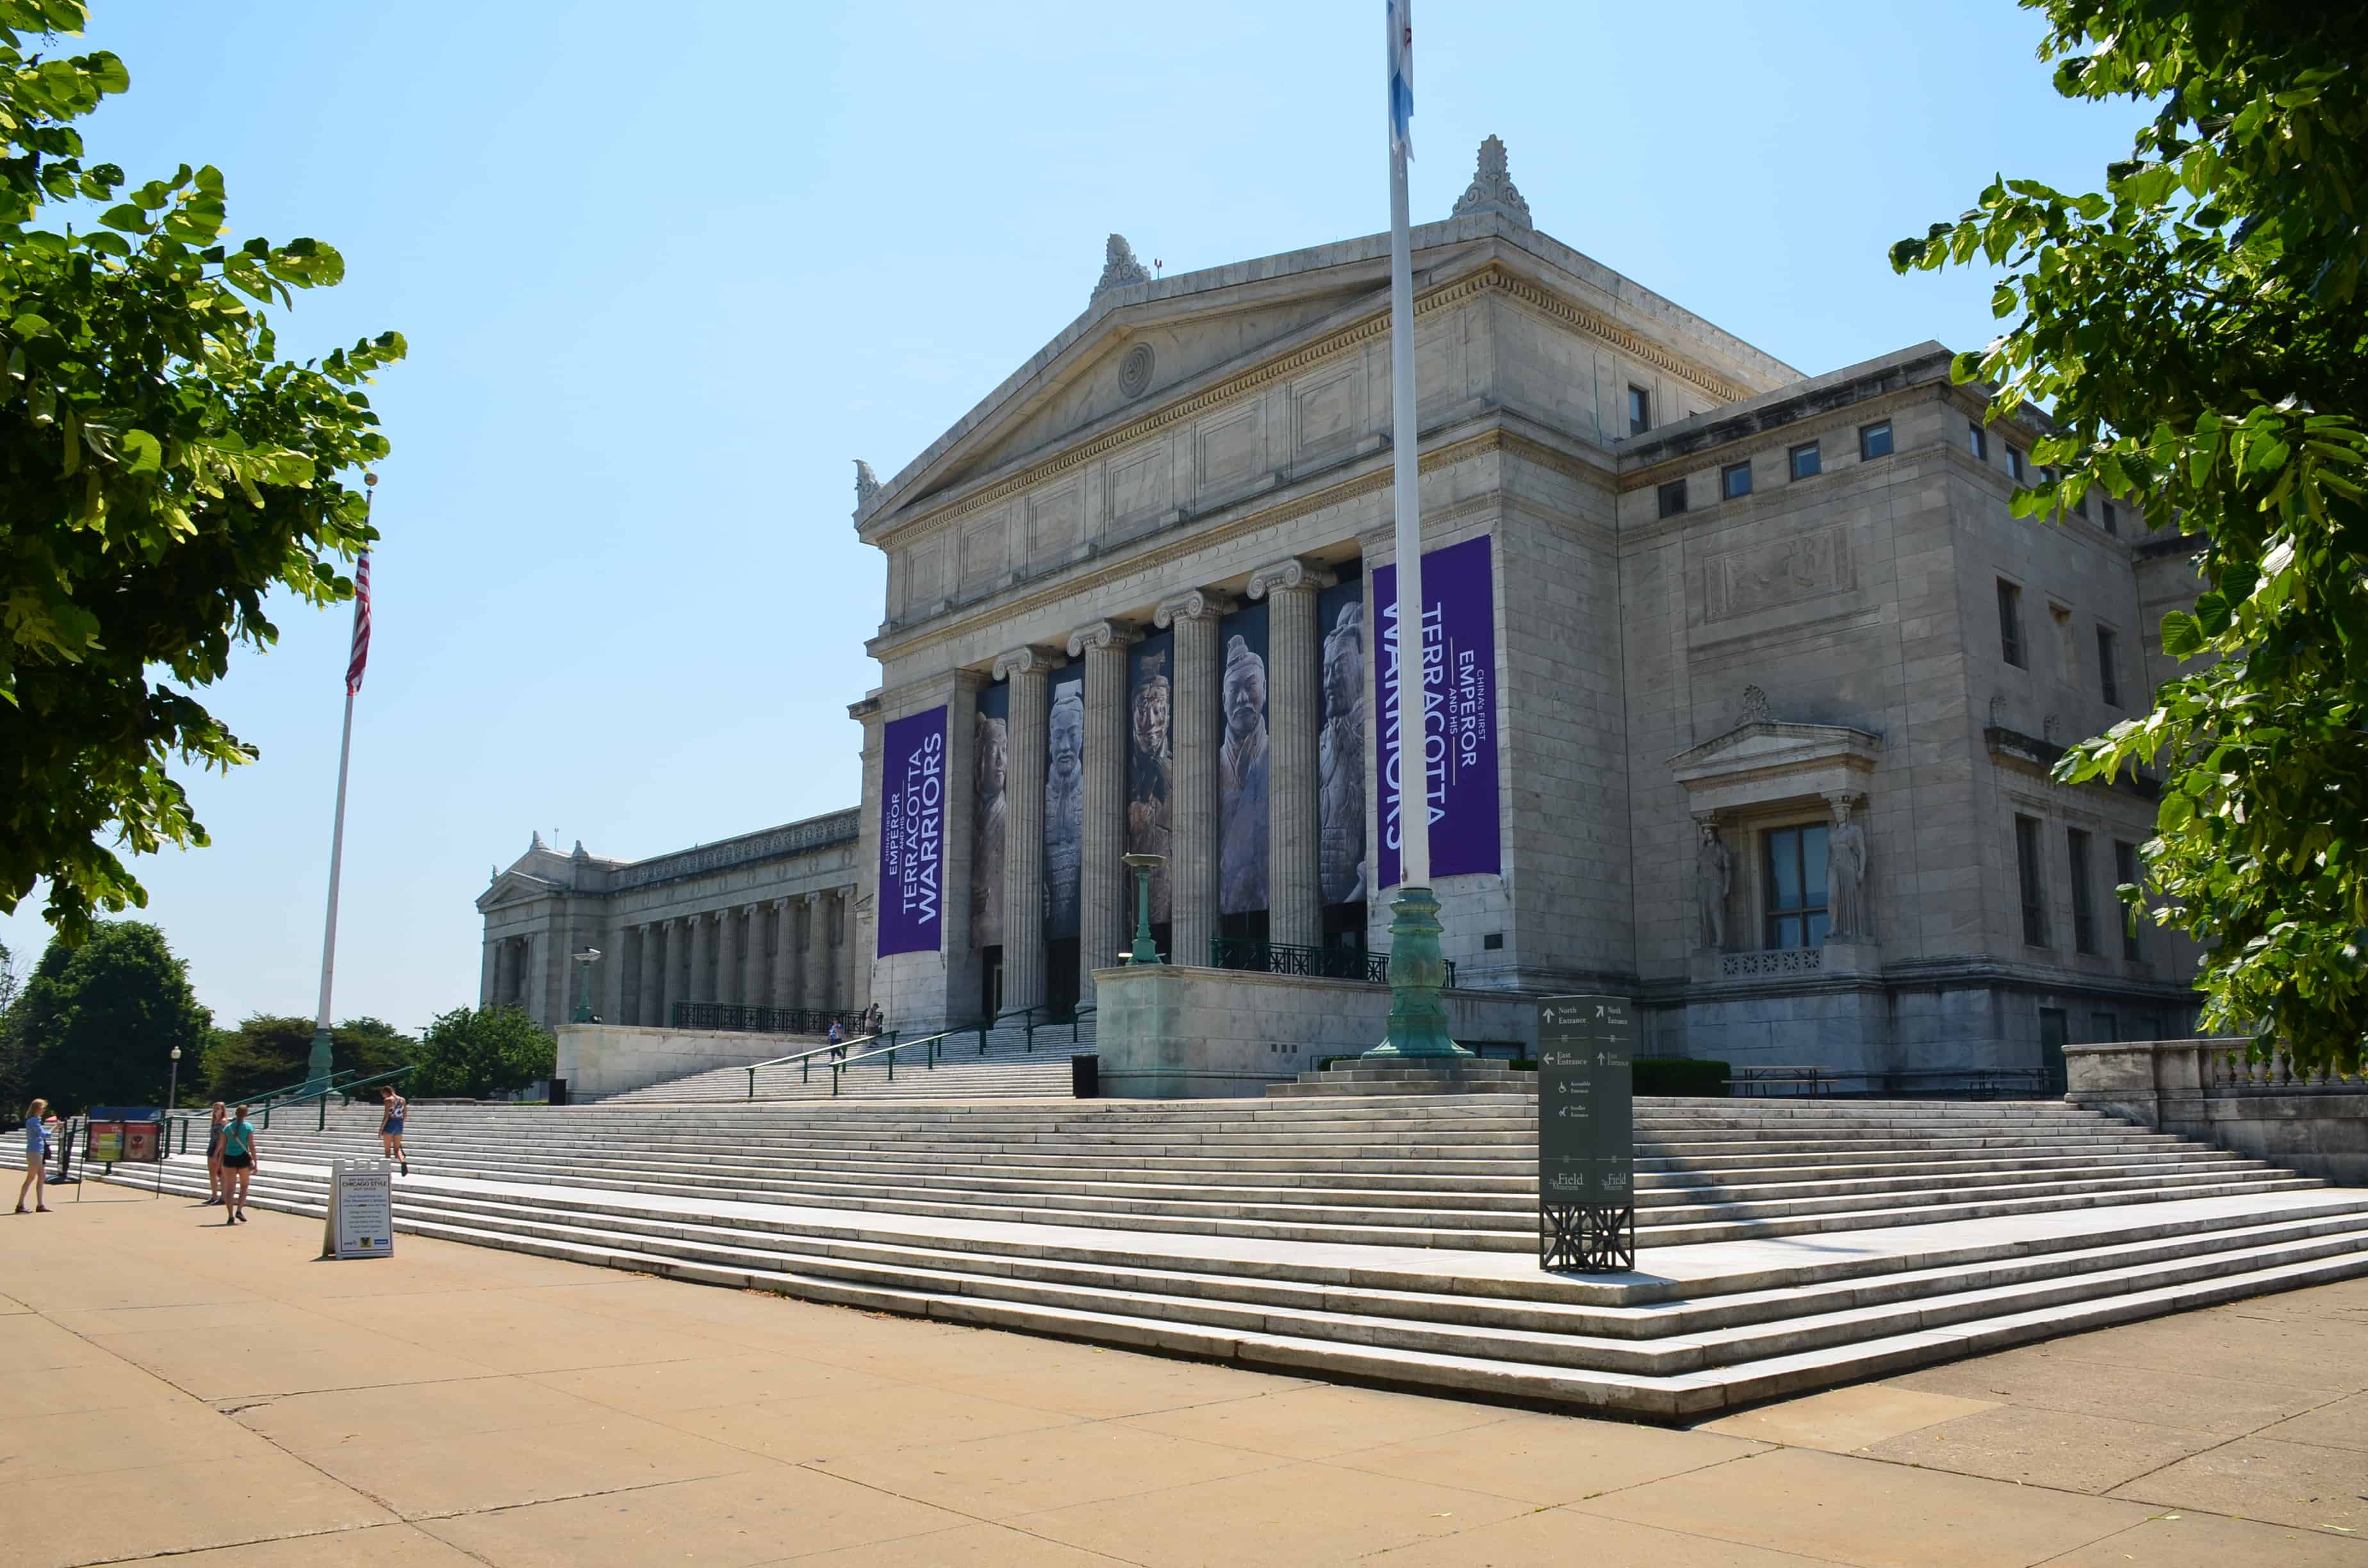 North side of the Field Museum at Museum Campus in Chicago, Illinois